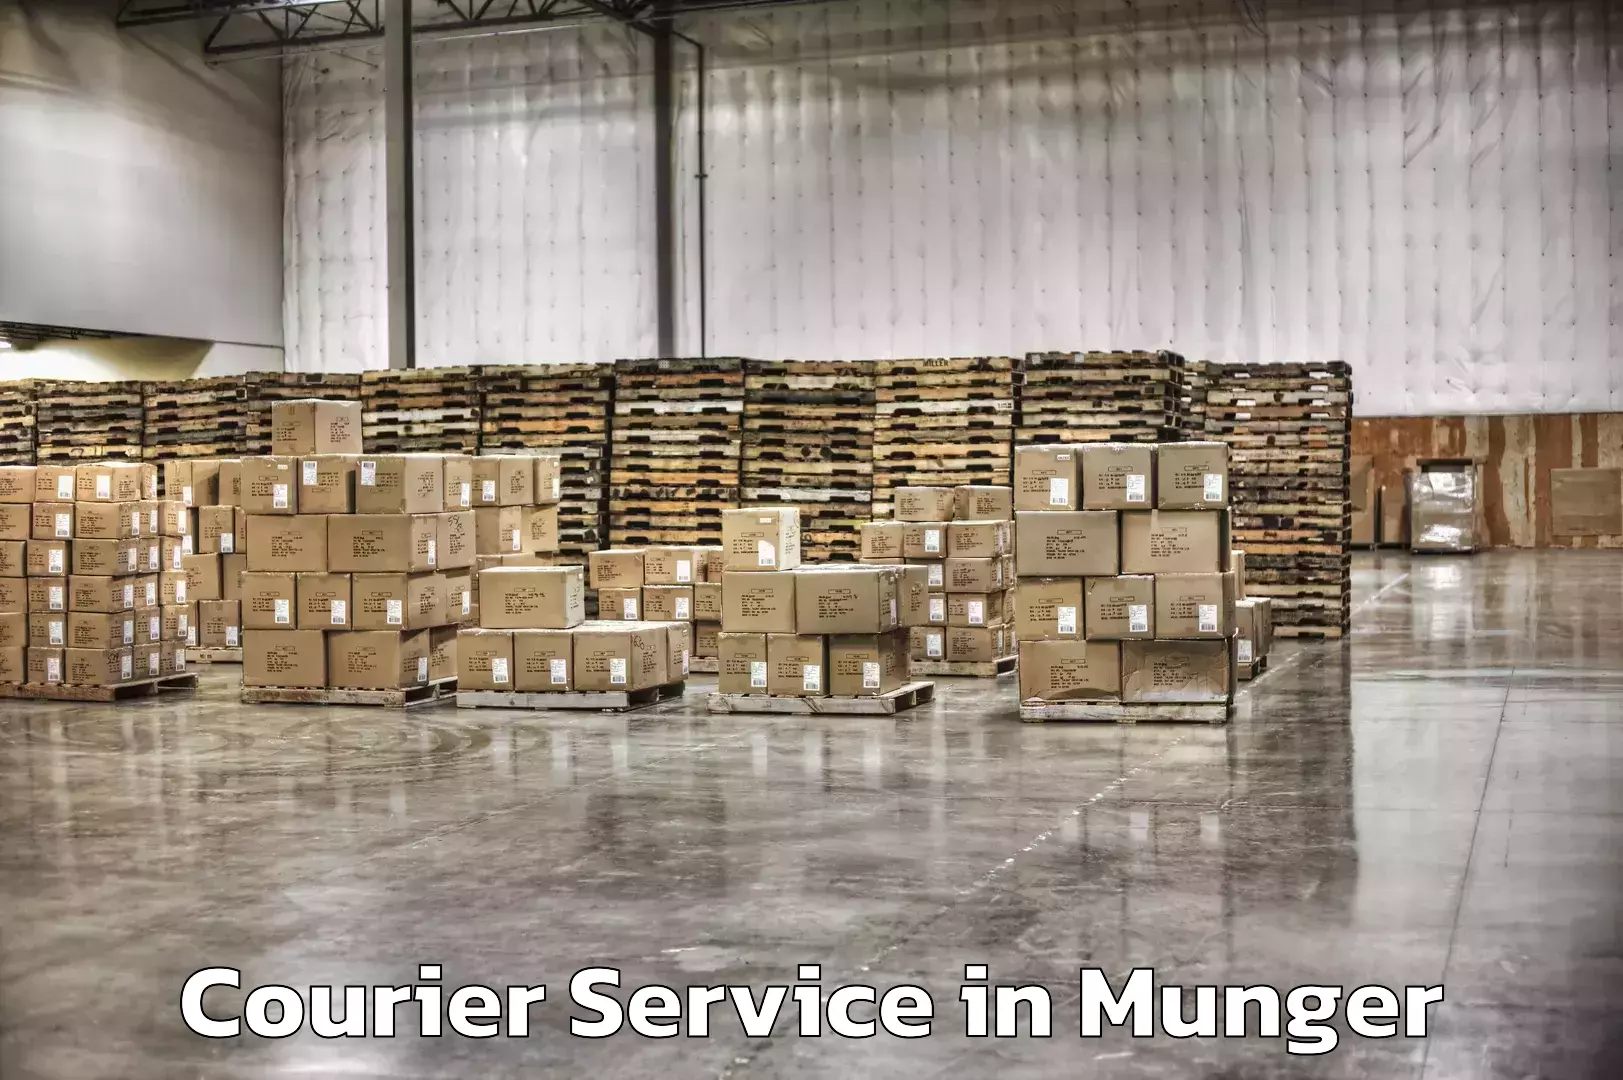 Parcel delivery automation in Munger